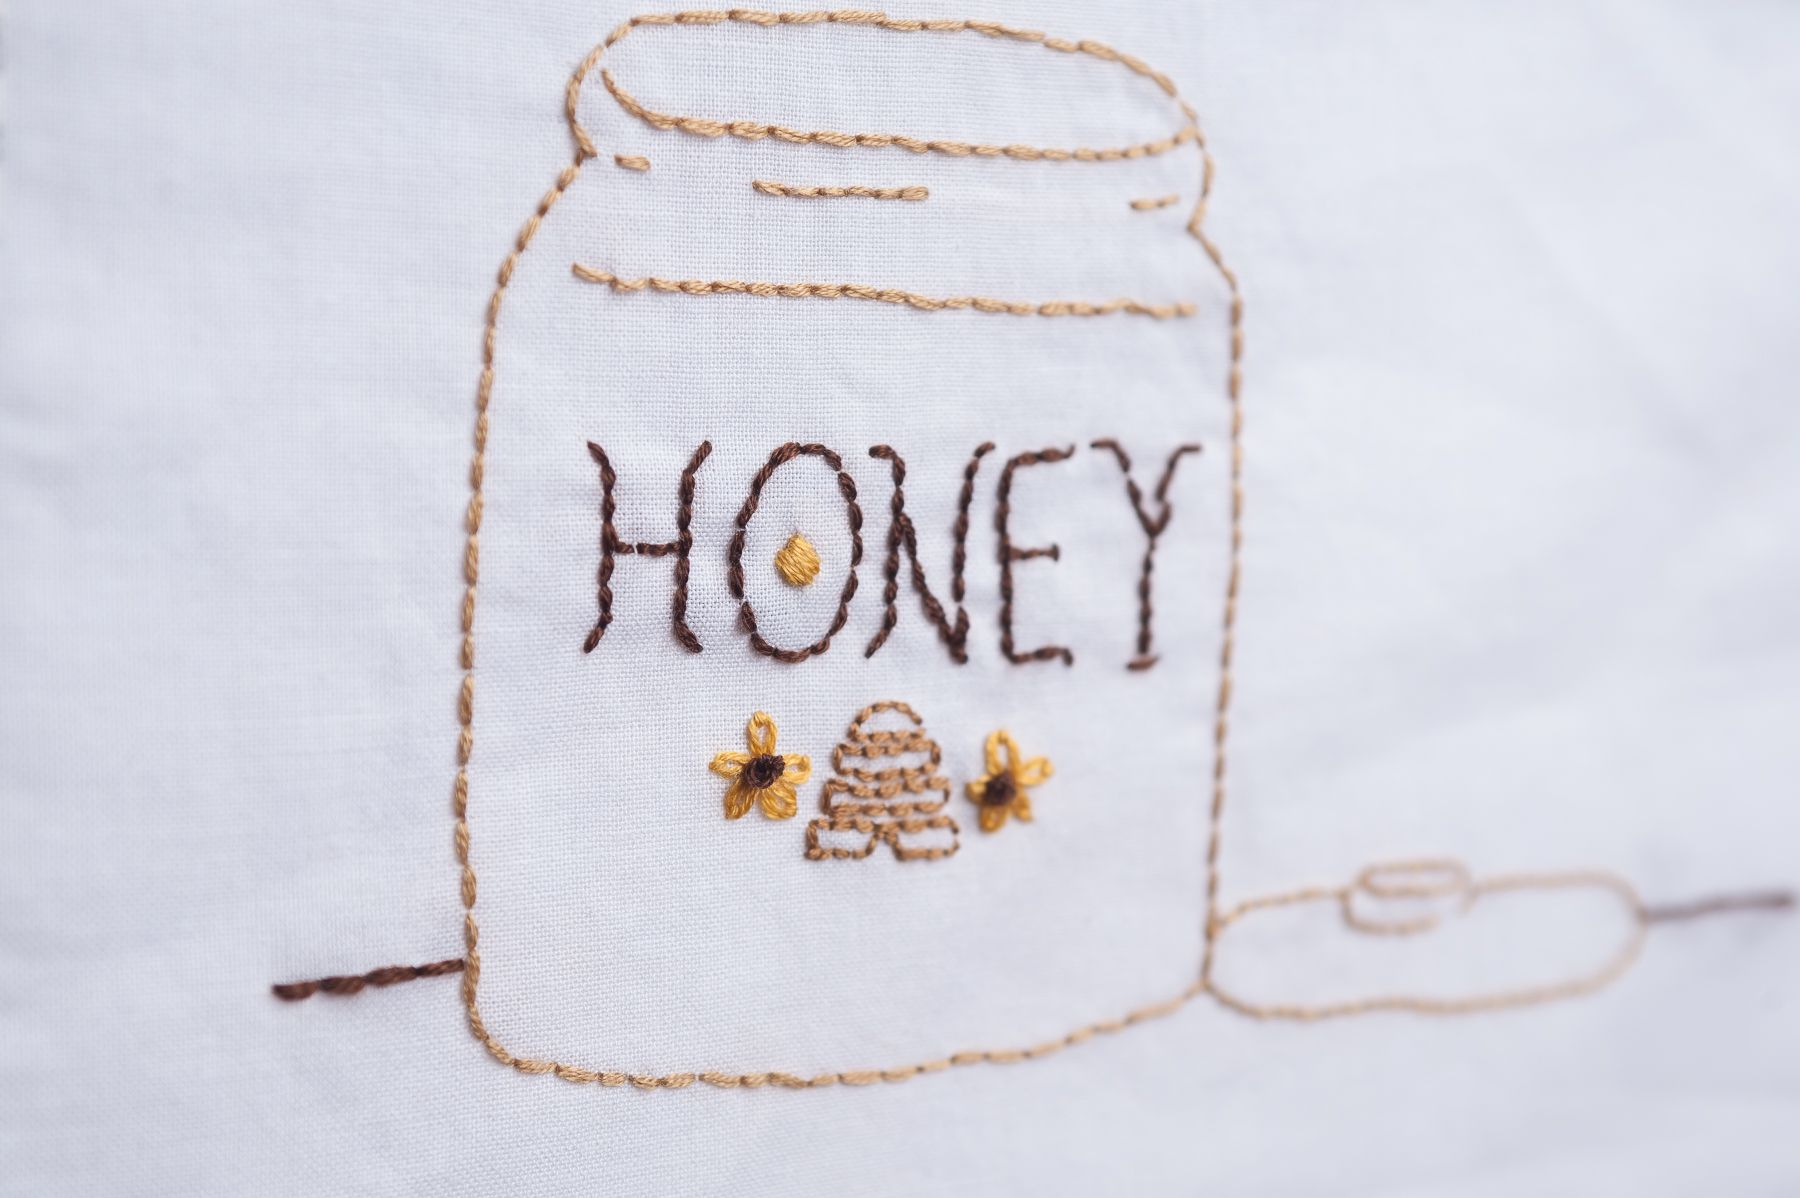 Bumble Bee Embroidery Pattern Bee And Honeycomb Themed Hand Embroidery Patterns